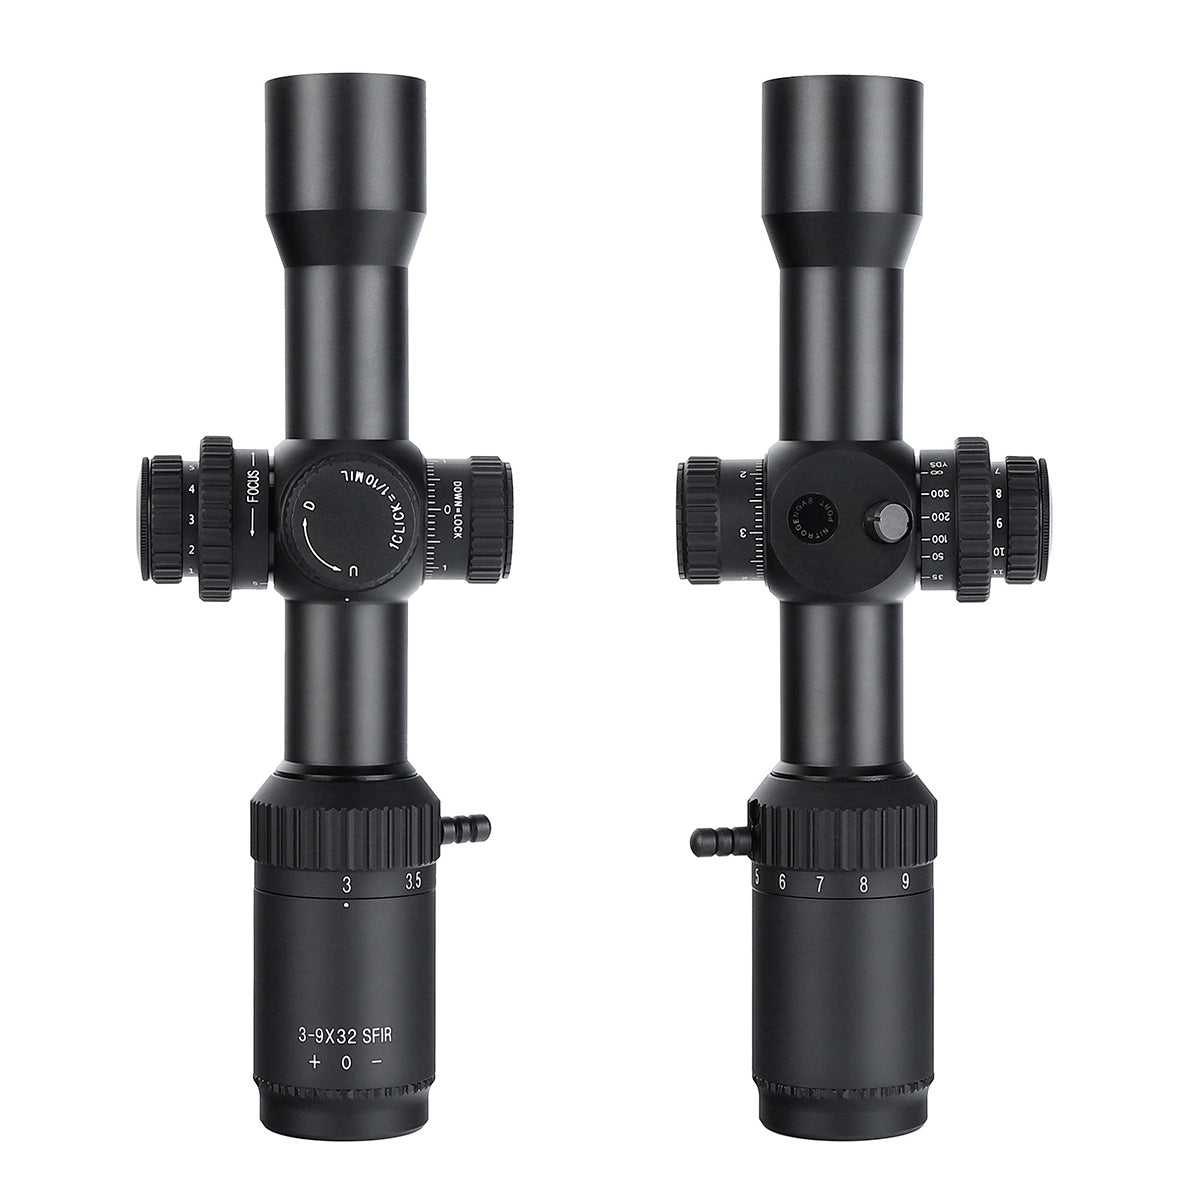 ohhunt® 3-9X32 SFIR Long Eye Relief Rifle Scope Mil Dot Reticle